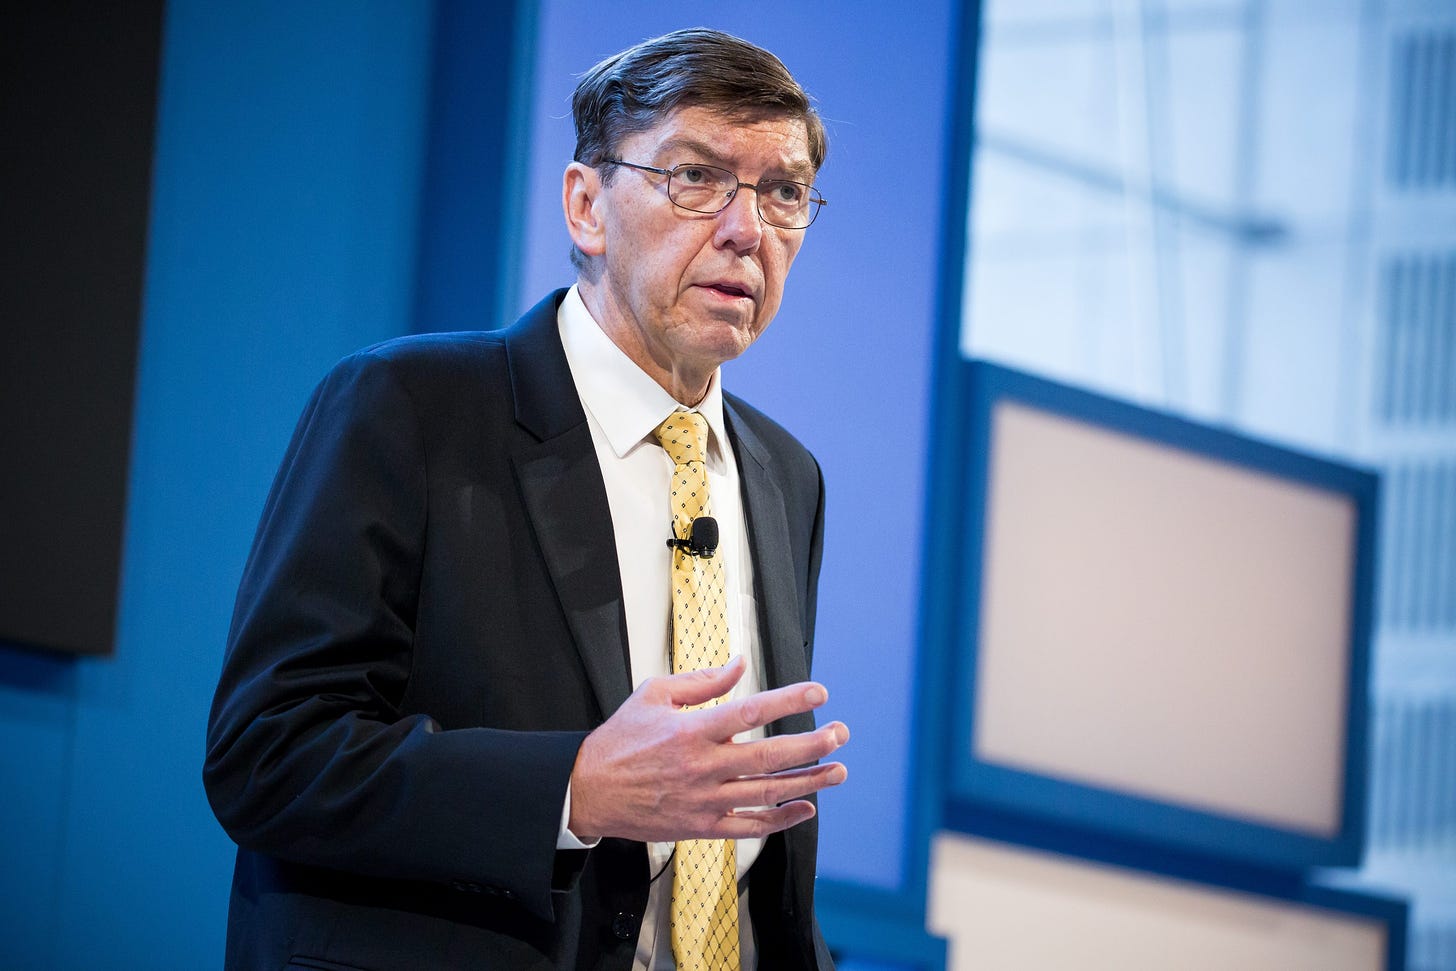 Clayton Christensen, who coined 'disruptive innovation.' dies at 67 |  Fortune